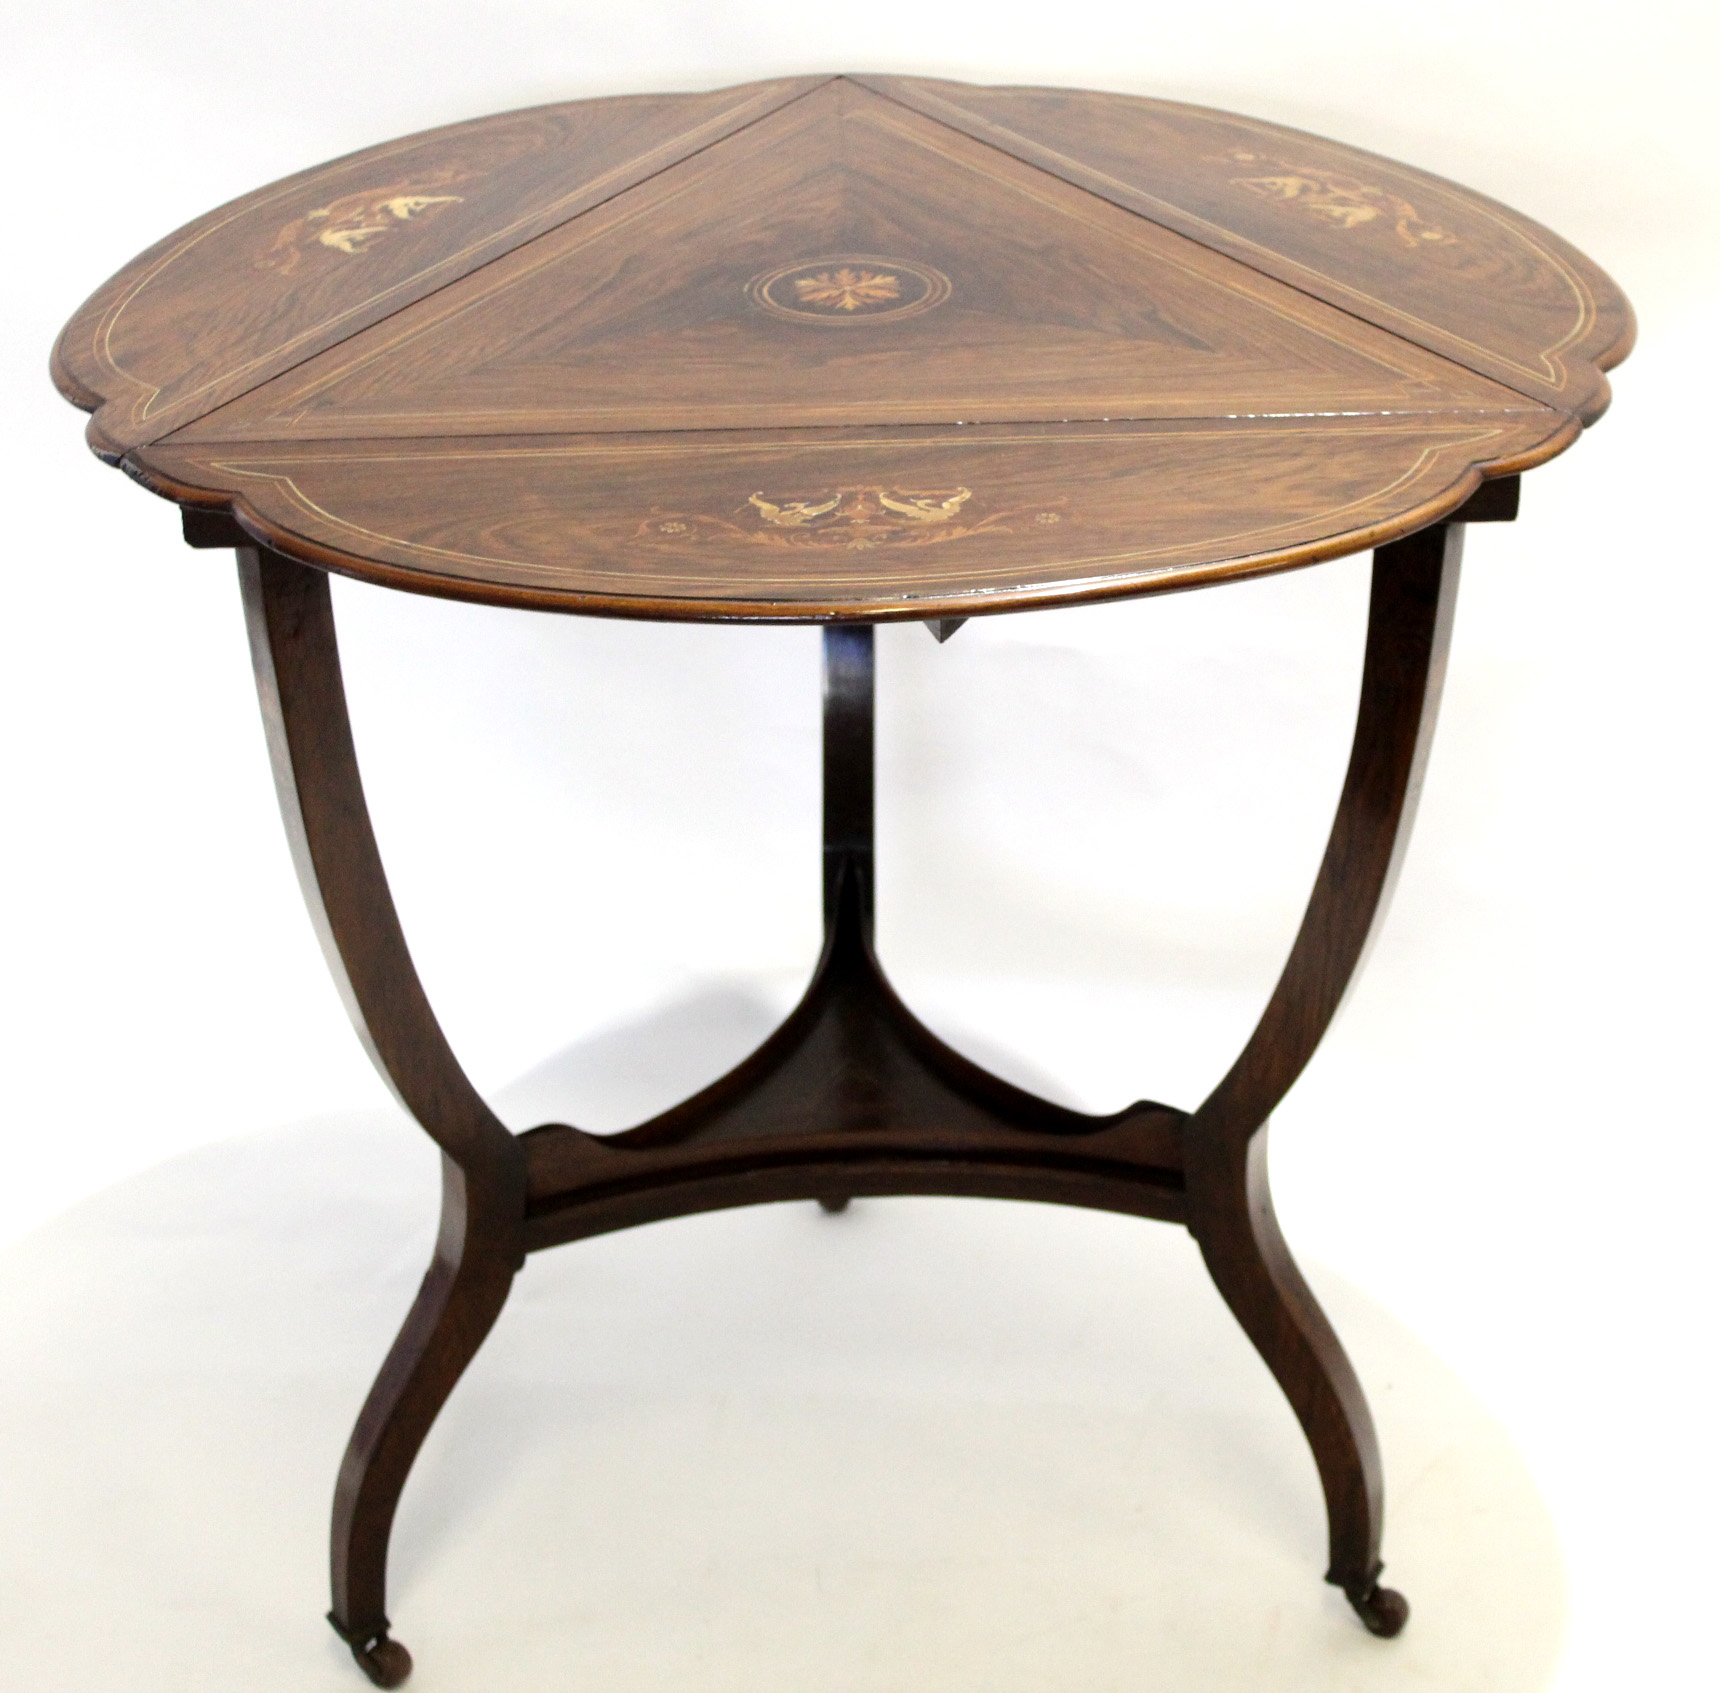 19th century rosewood and inlaid triangular occasional table with three drop flaps with open shelves